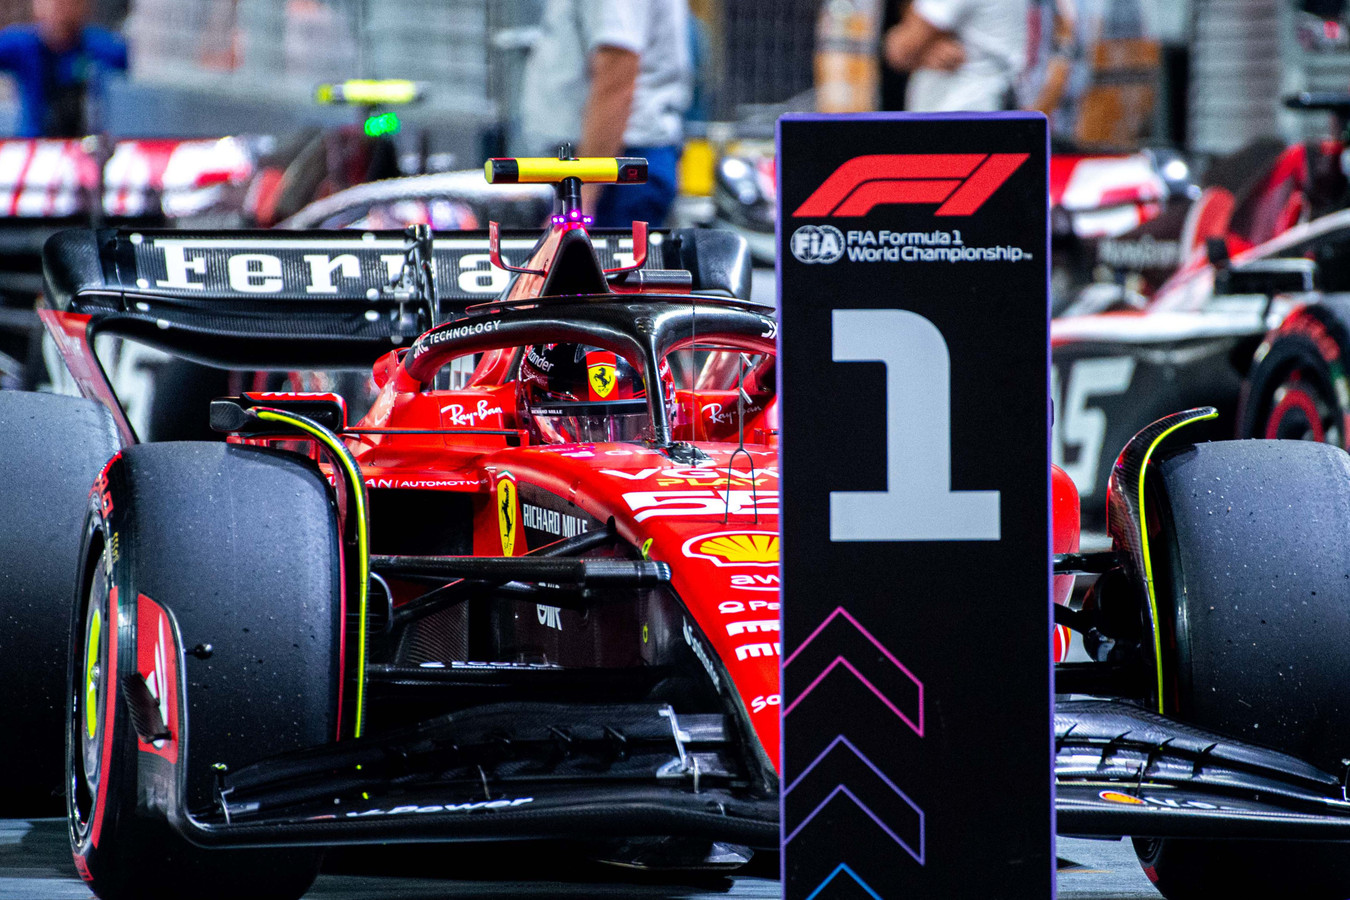 Carlos Sainz (55) parks at the #1 pit board after securing the pole position for Ferrari at the Marina Bay Street Circuit for the Formula 1 Singapore Grand Prix